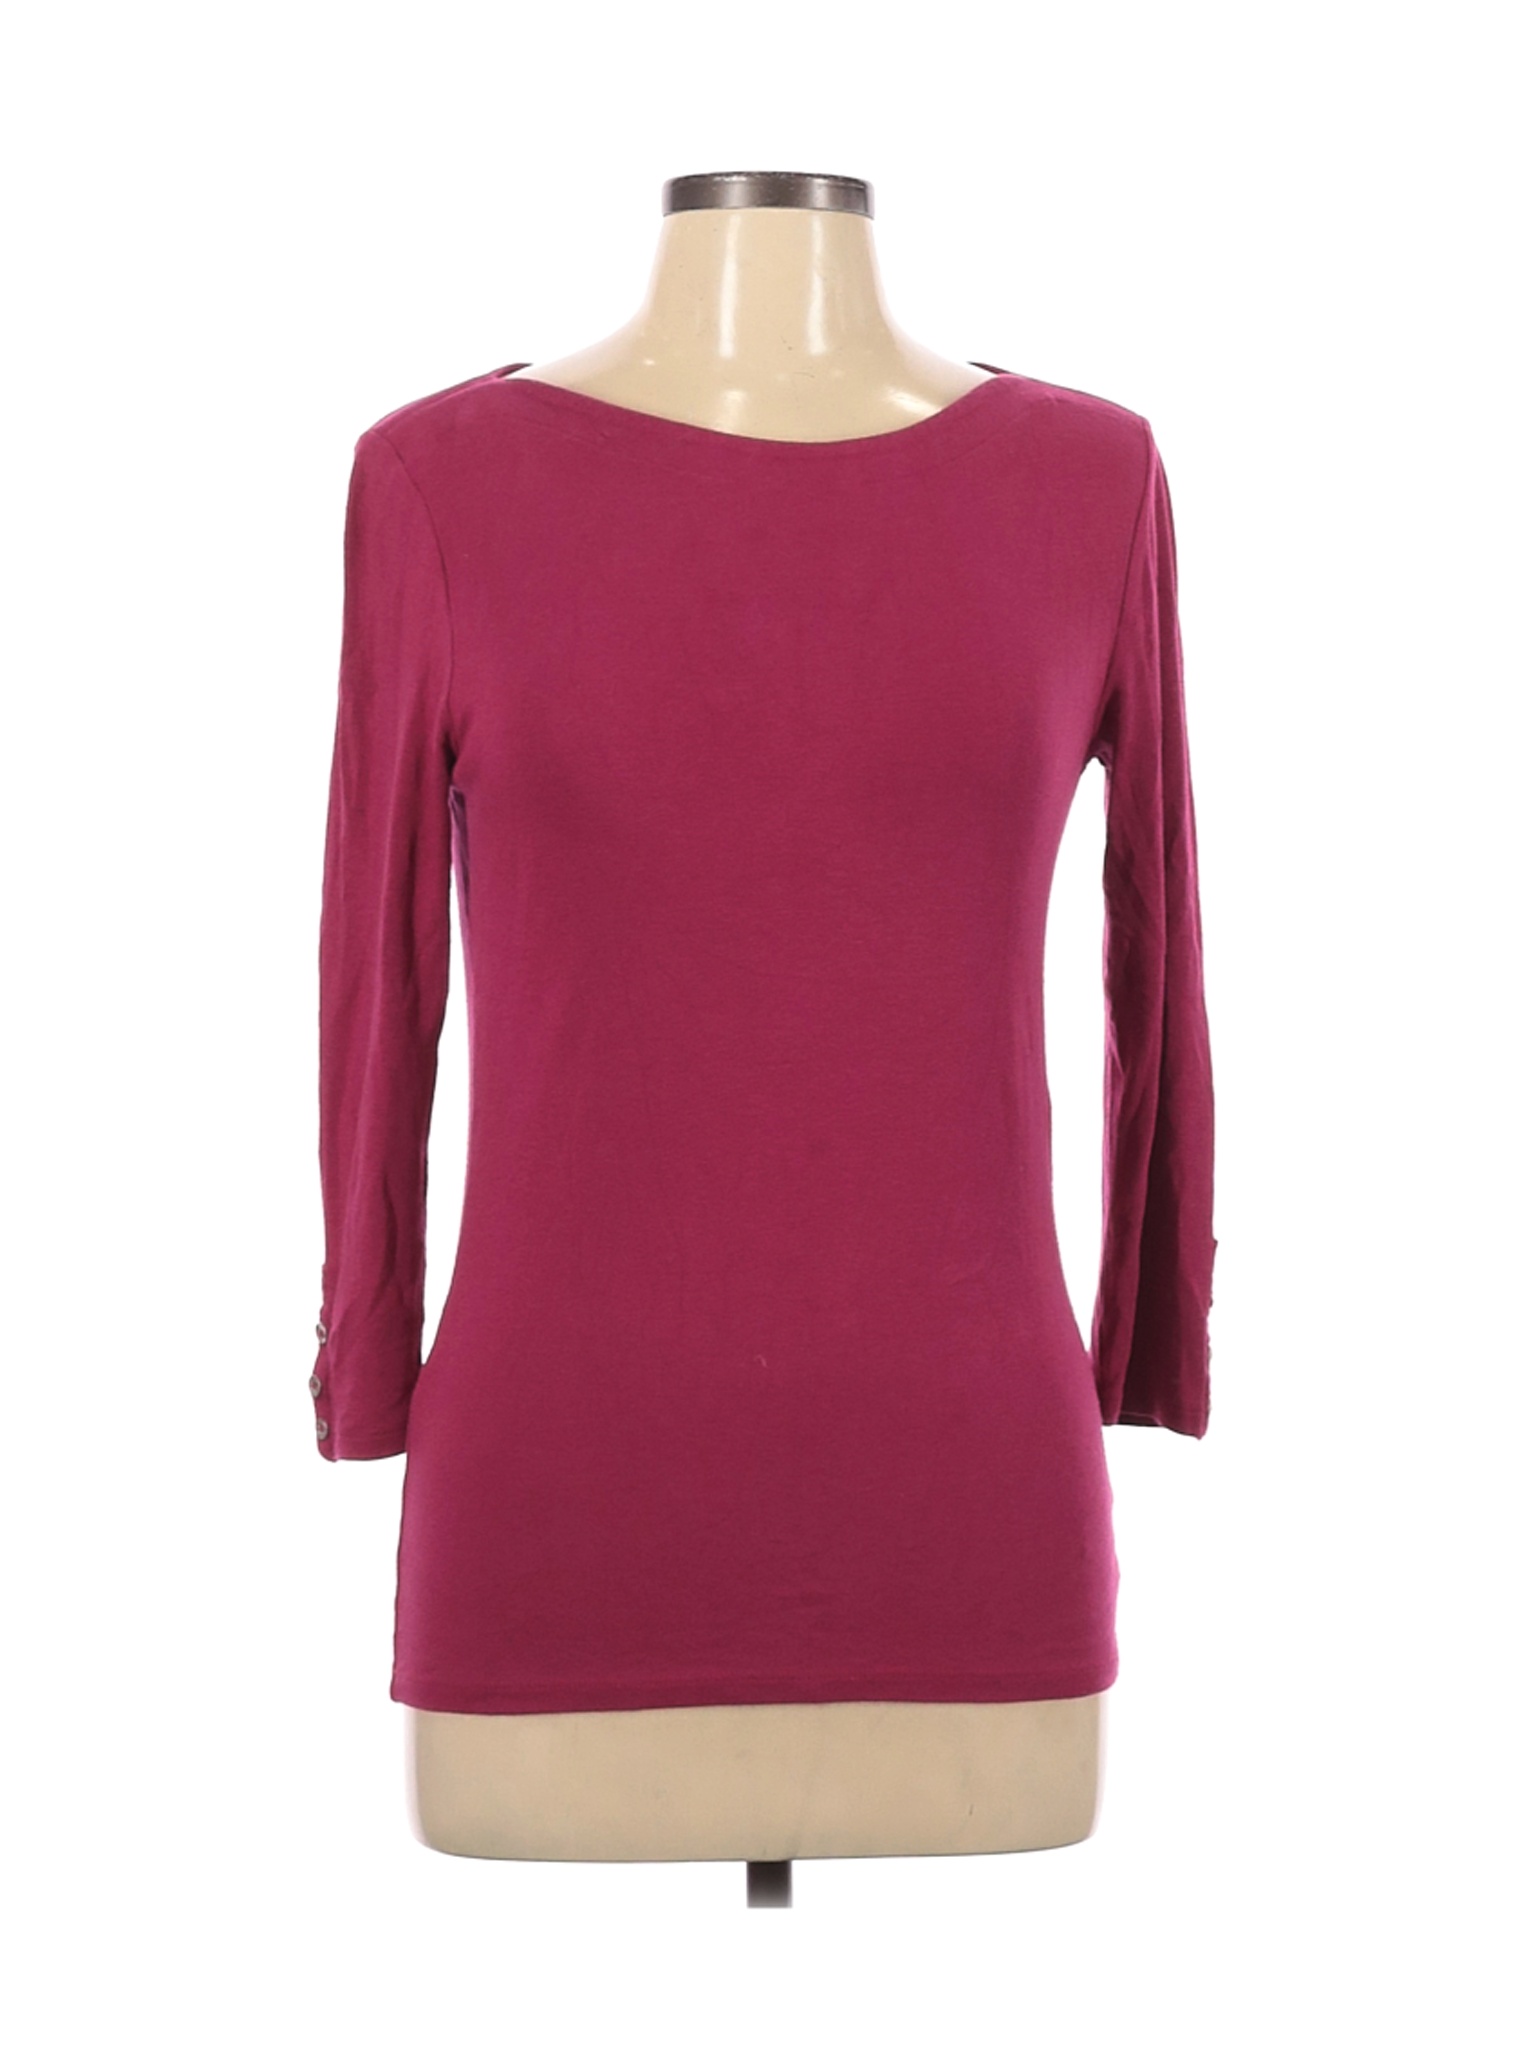 Willi Smith Solid Maroon Pink 3/4 Sleeve Top Size M - 25% off | thredUP